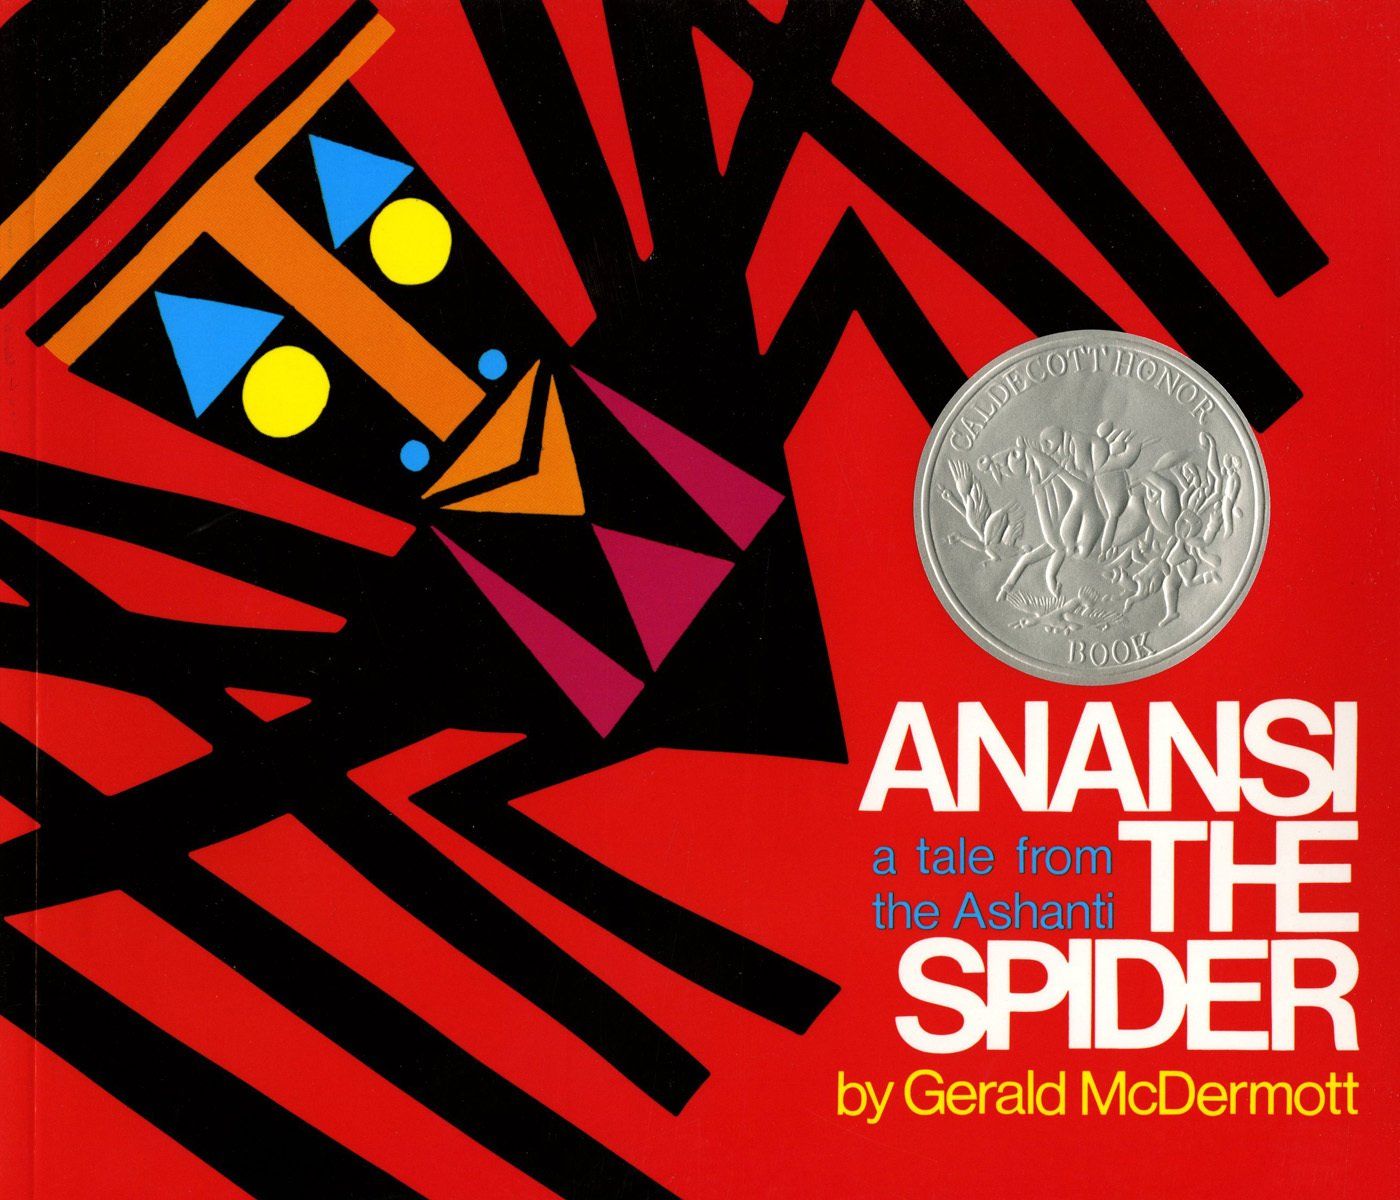 book cover of Anansi the Spider by Gerald McDermott